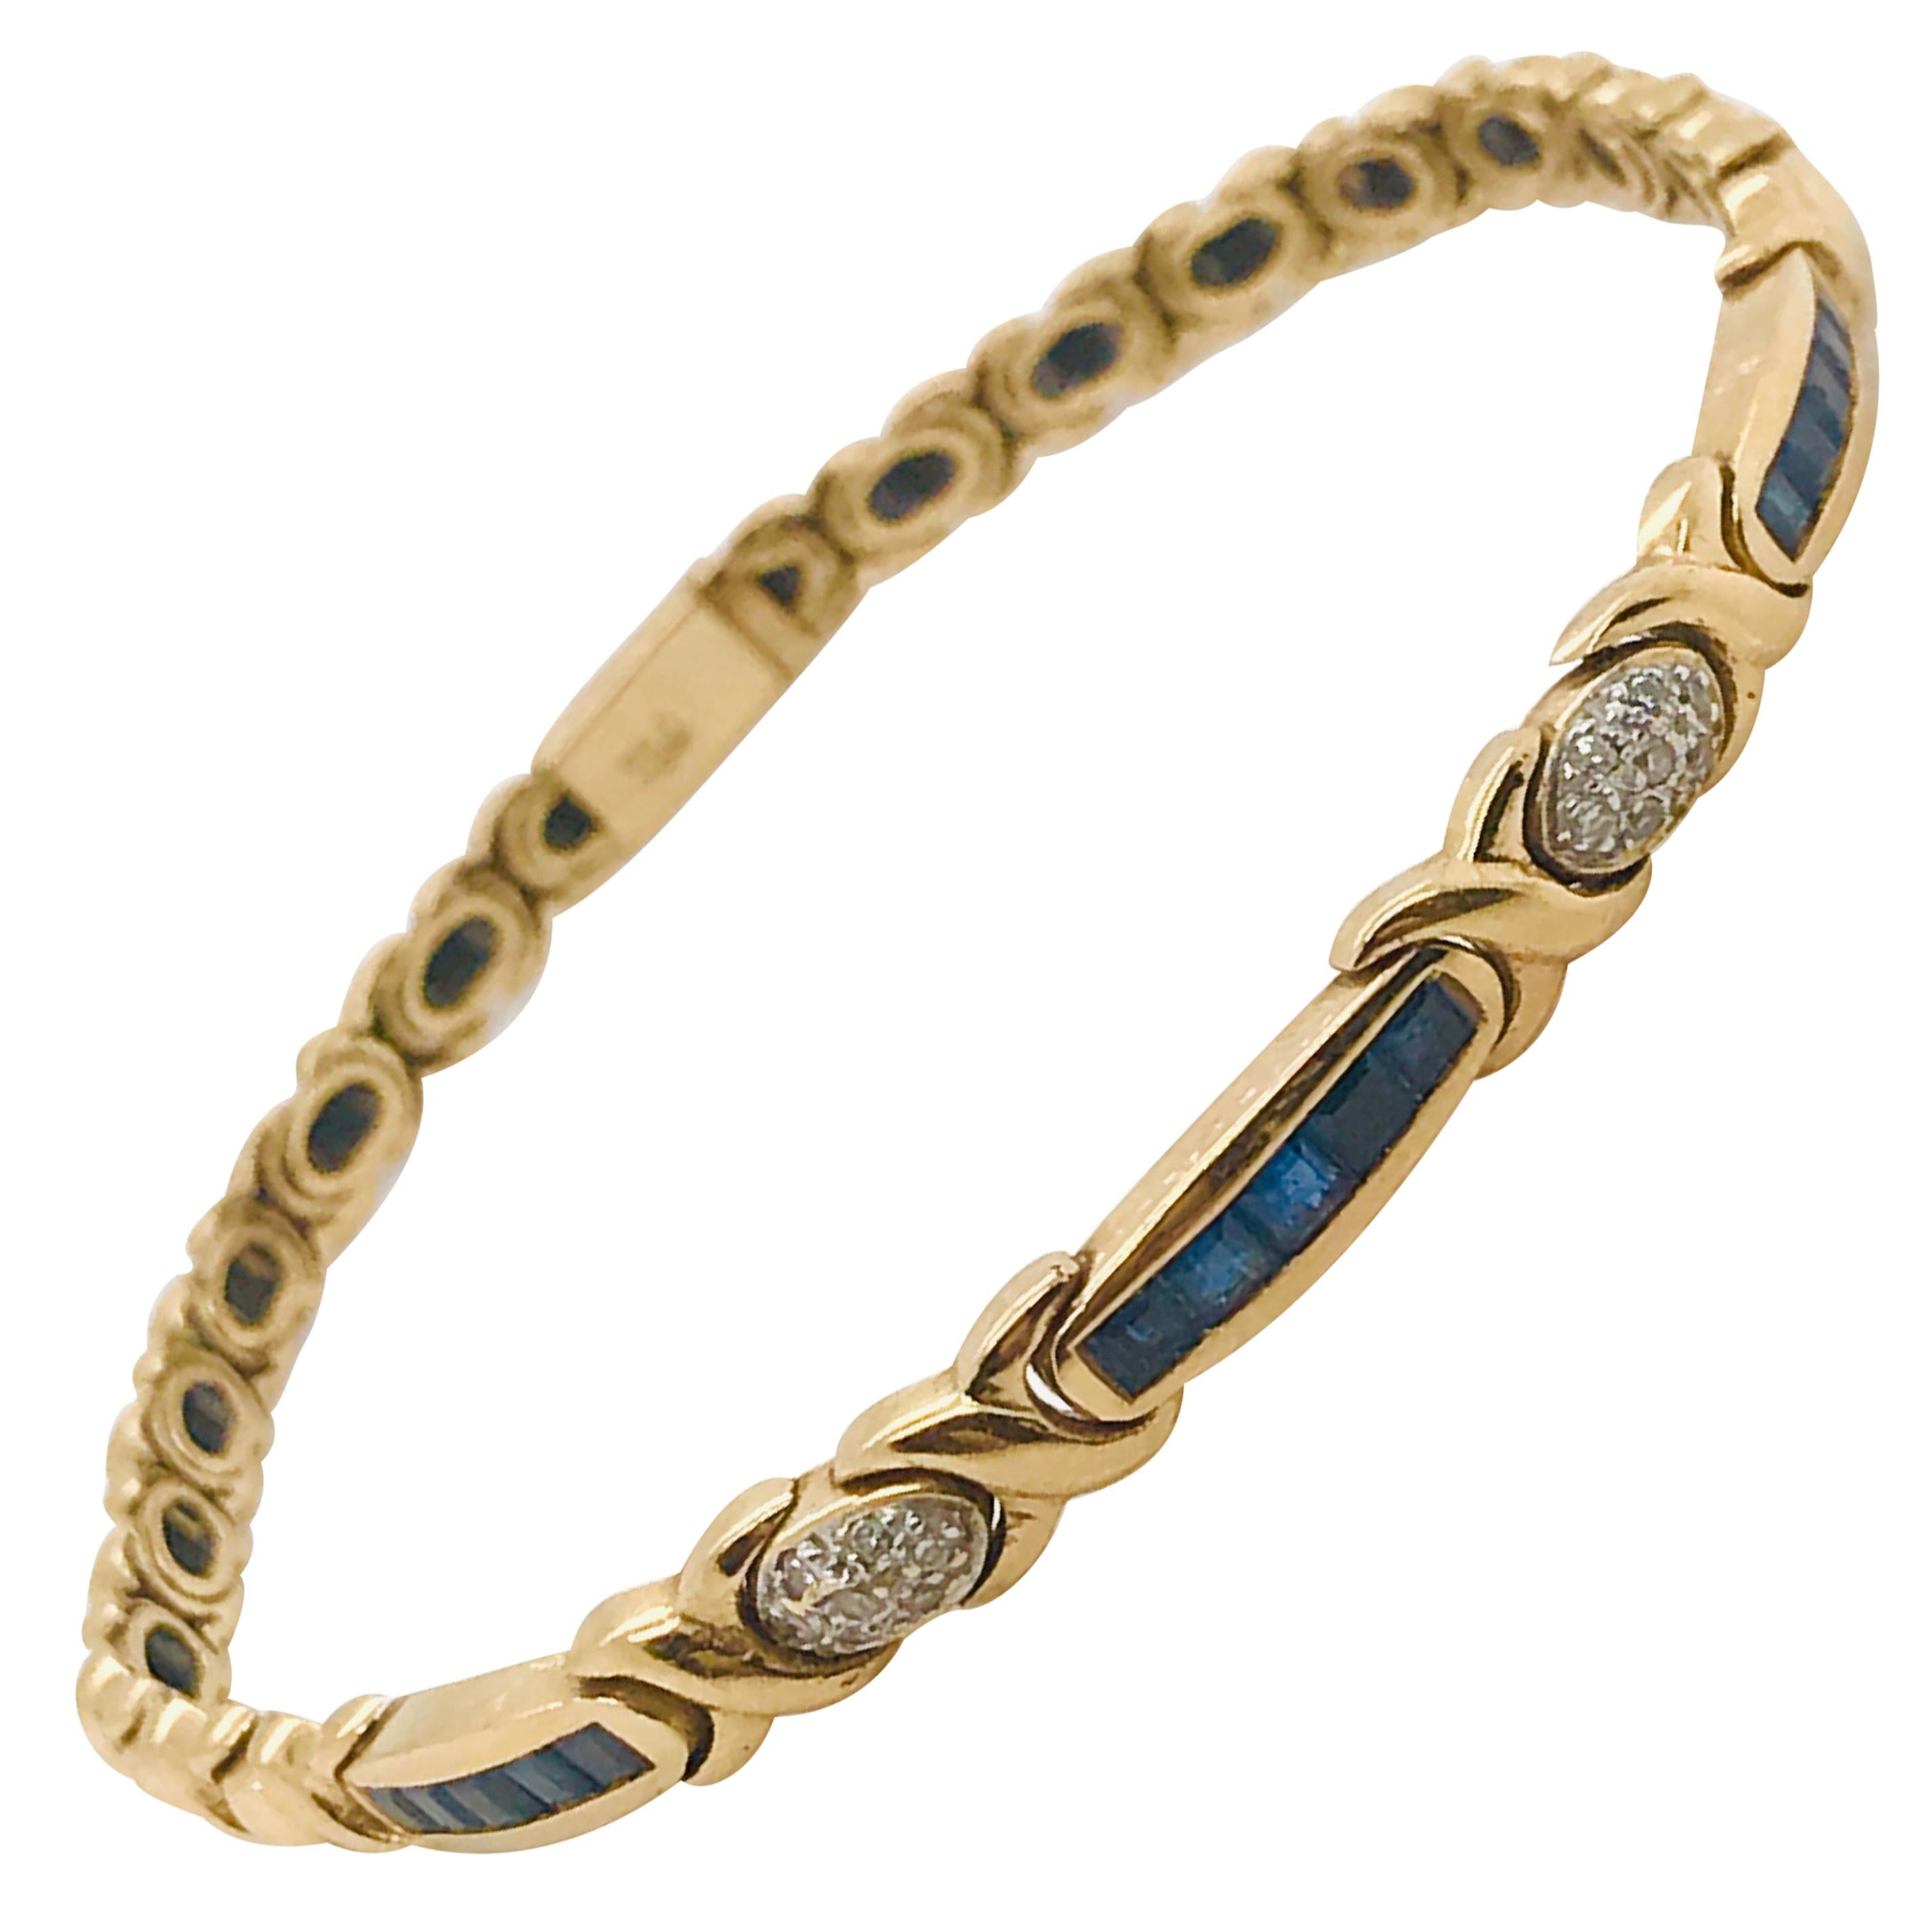 Yellow Gold 18 Carat Bracelet with Sapphires and Diamonds